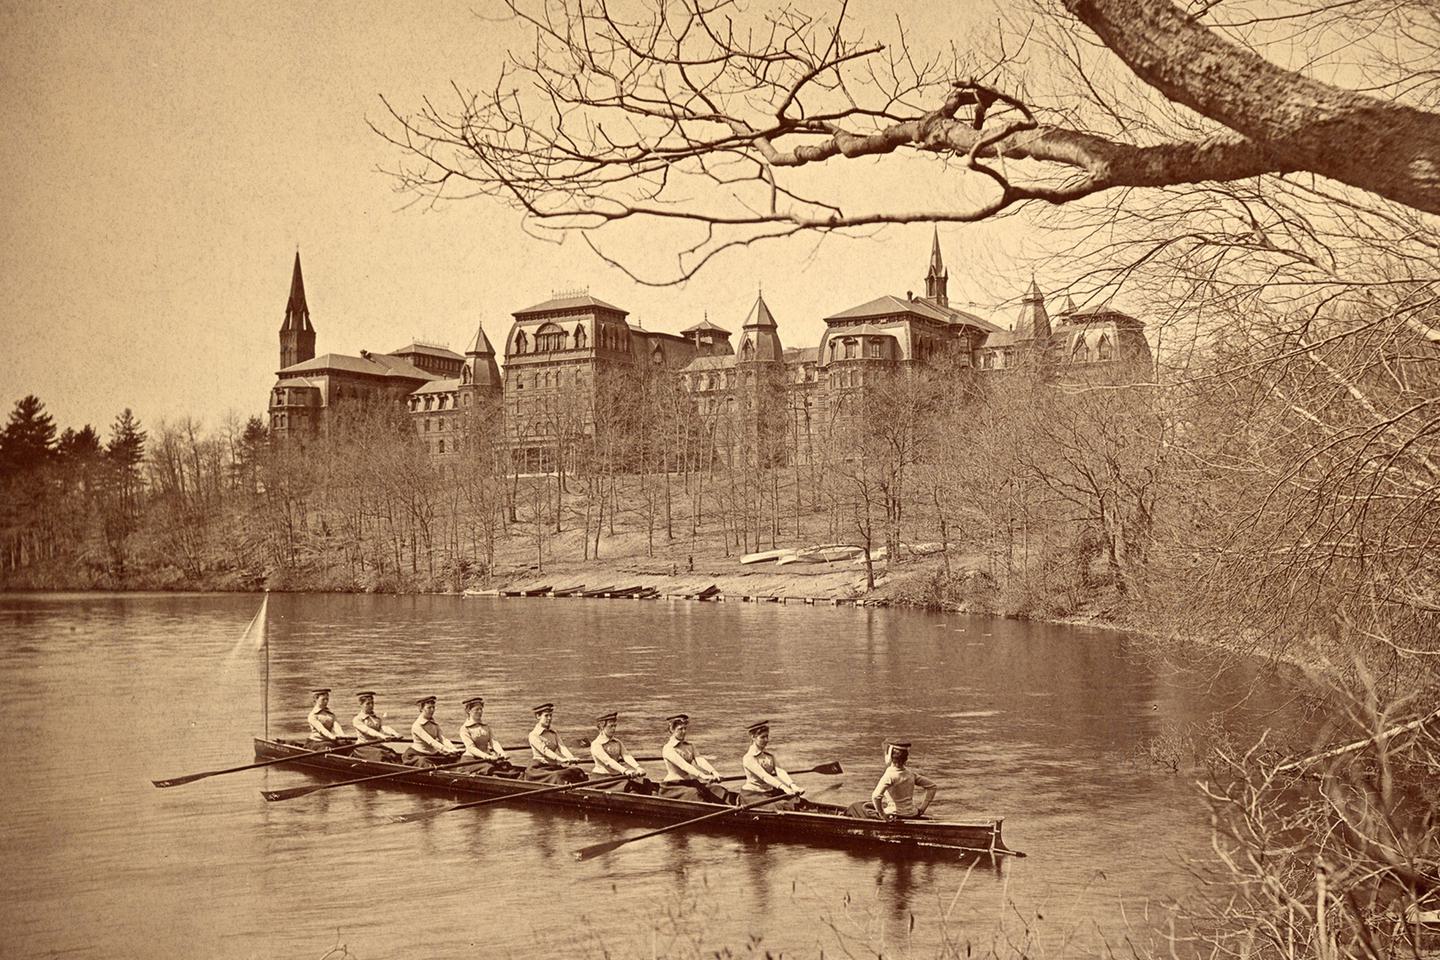 The class crew of 1894 rows on Lake Waban, with College Hall in the background.